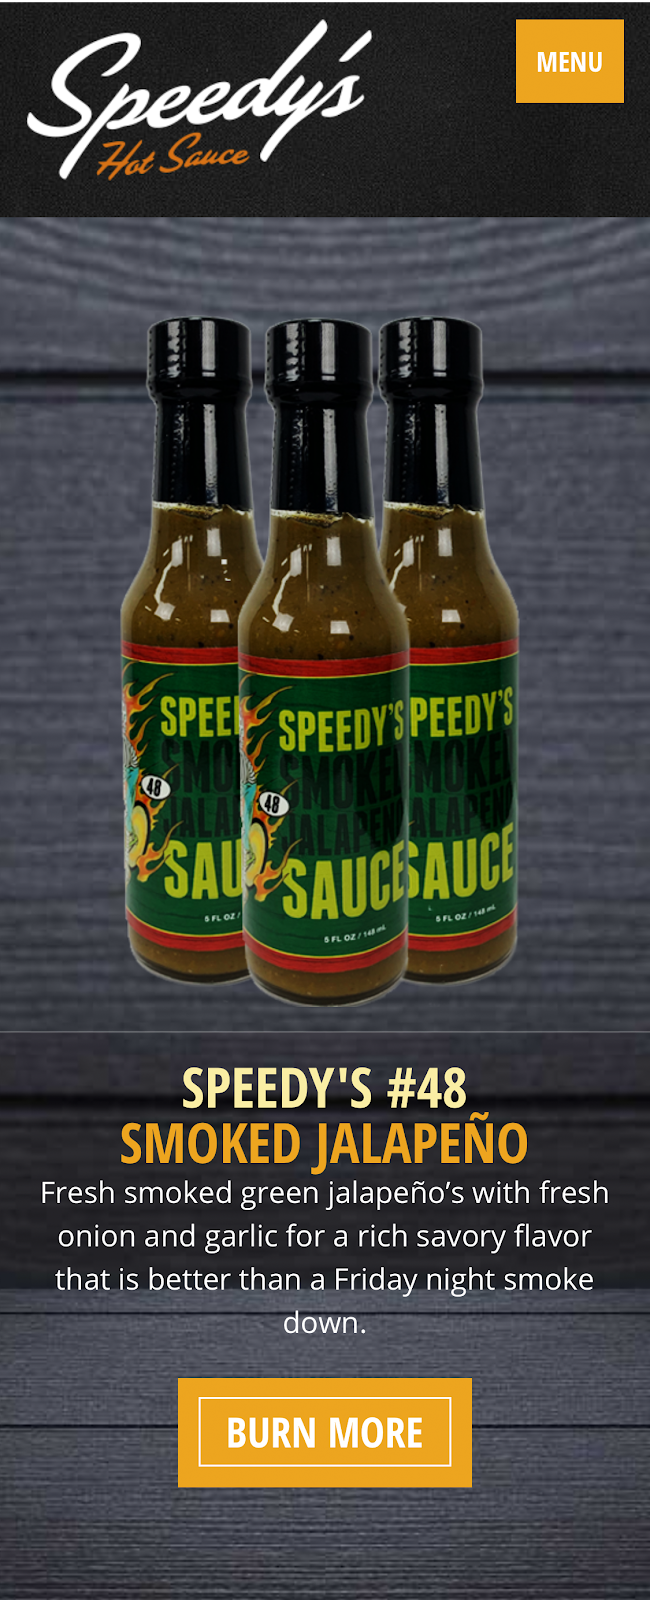 Dark mobile web design with a woodgrain background for a hot sauce food brand